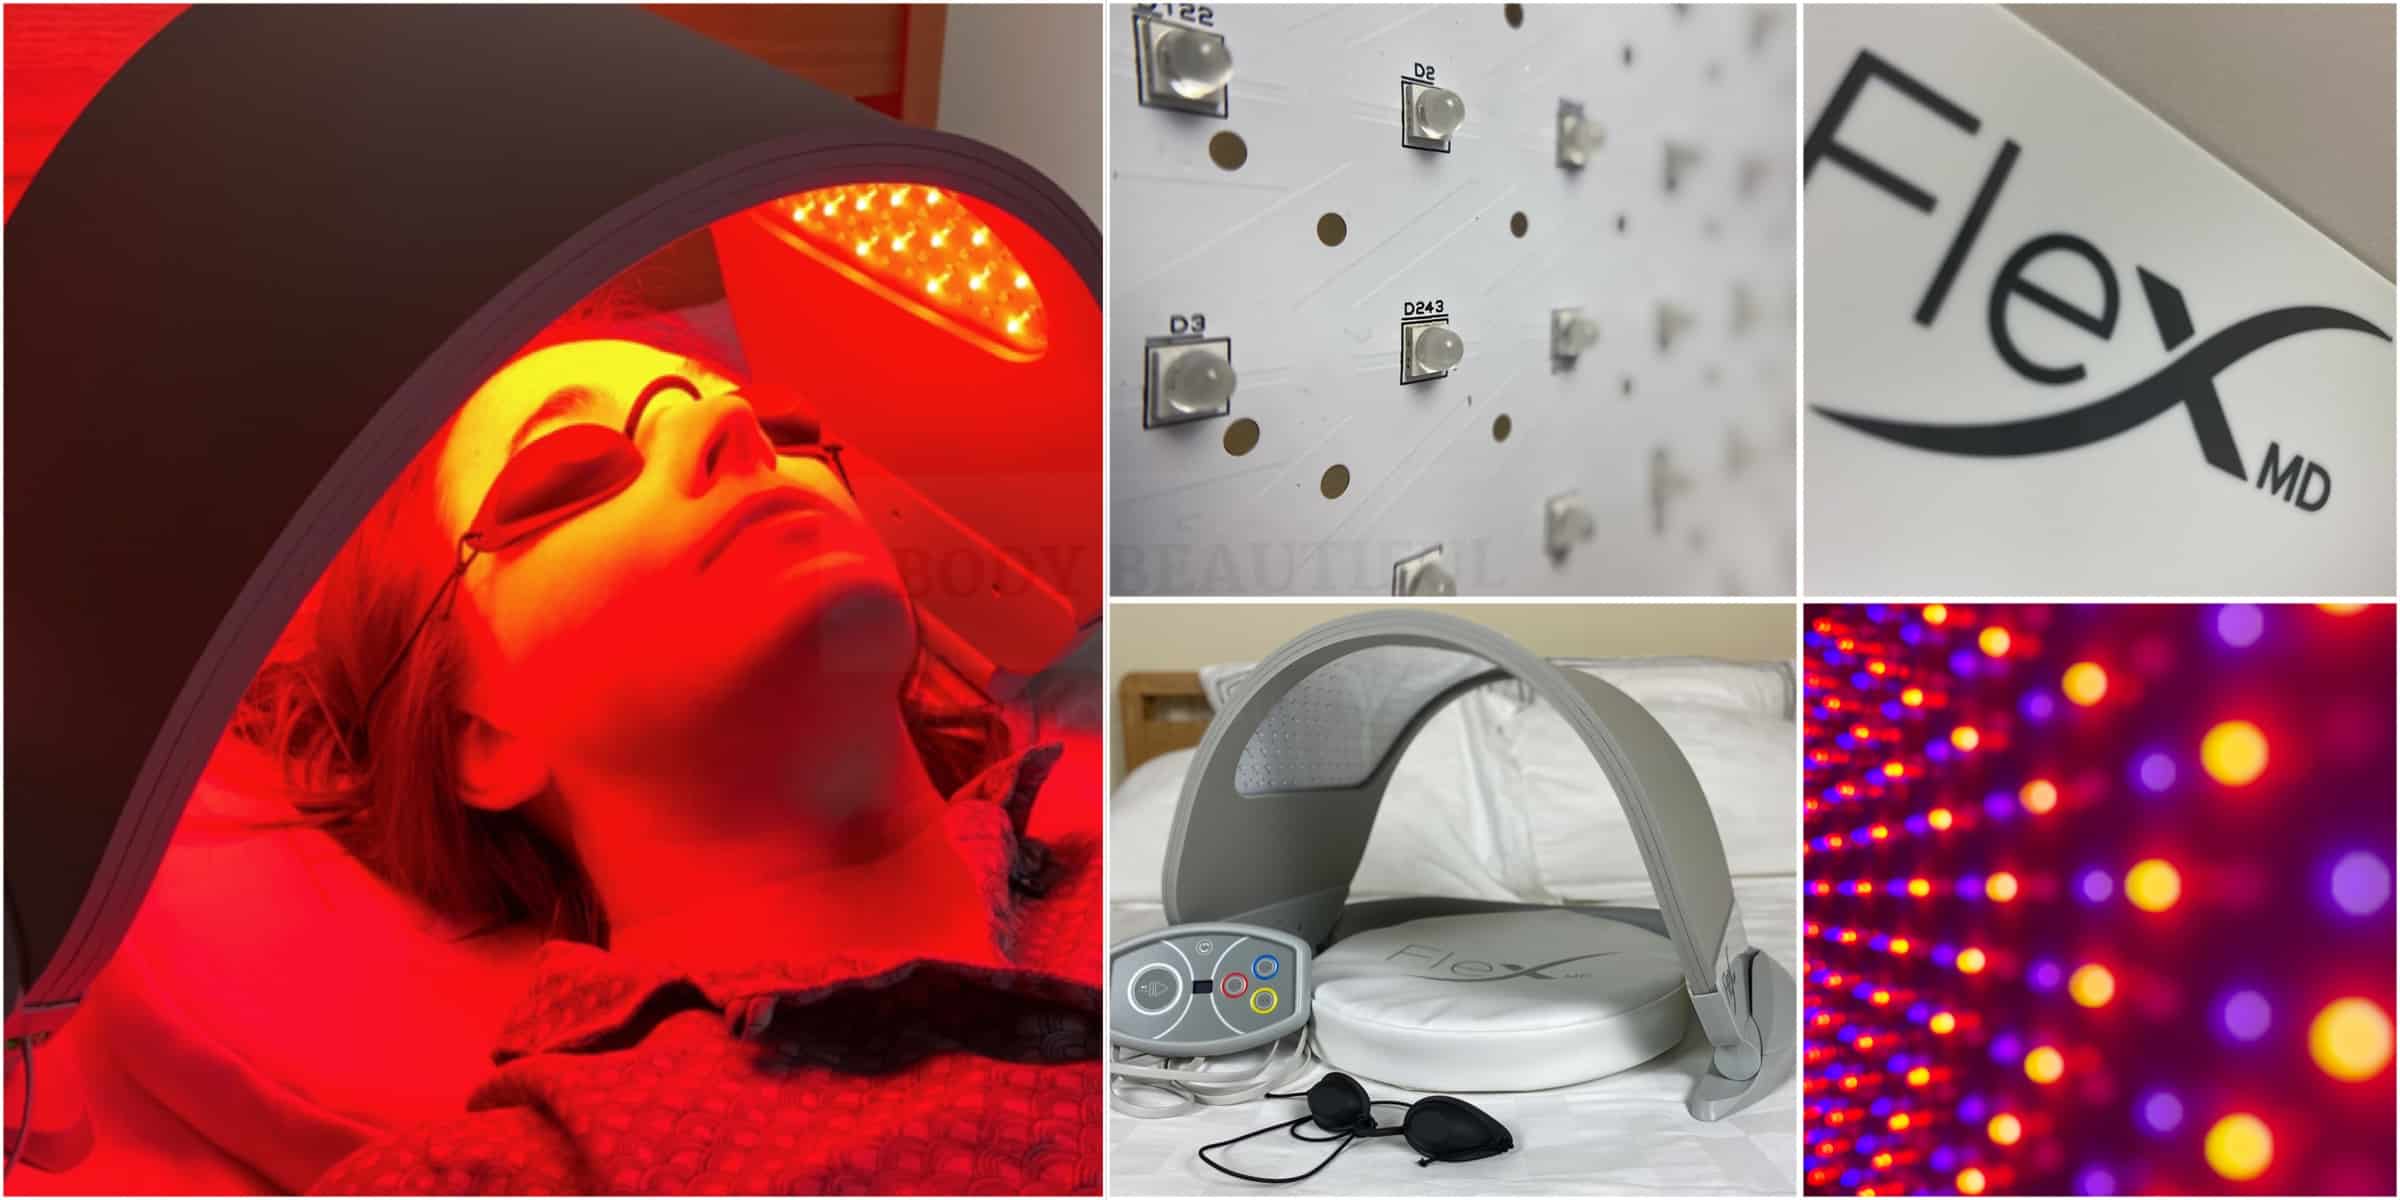 Dermalux Flex MD light therapy review: before vs after